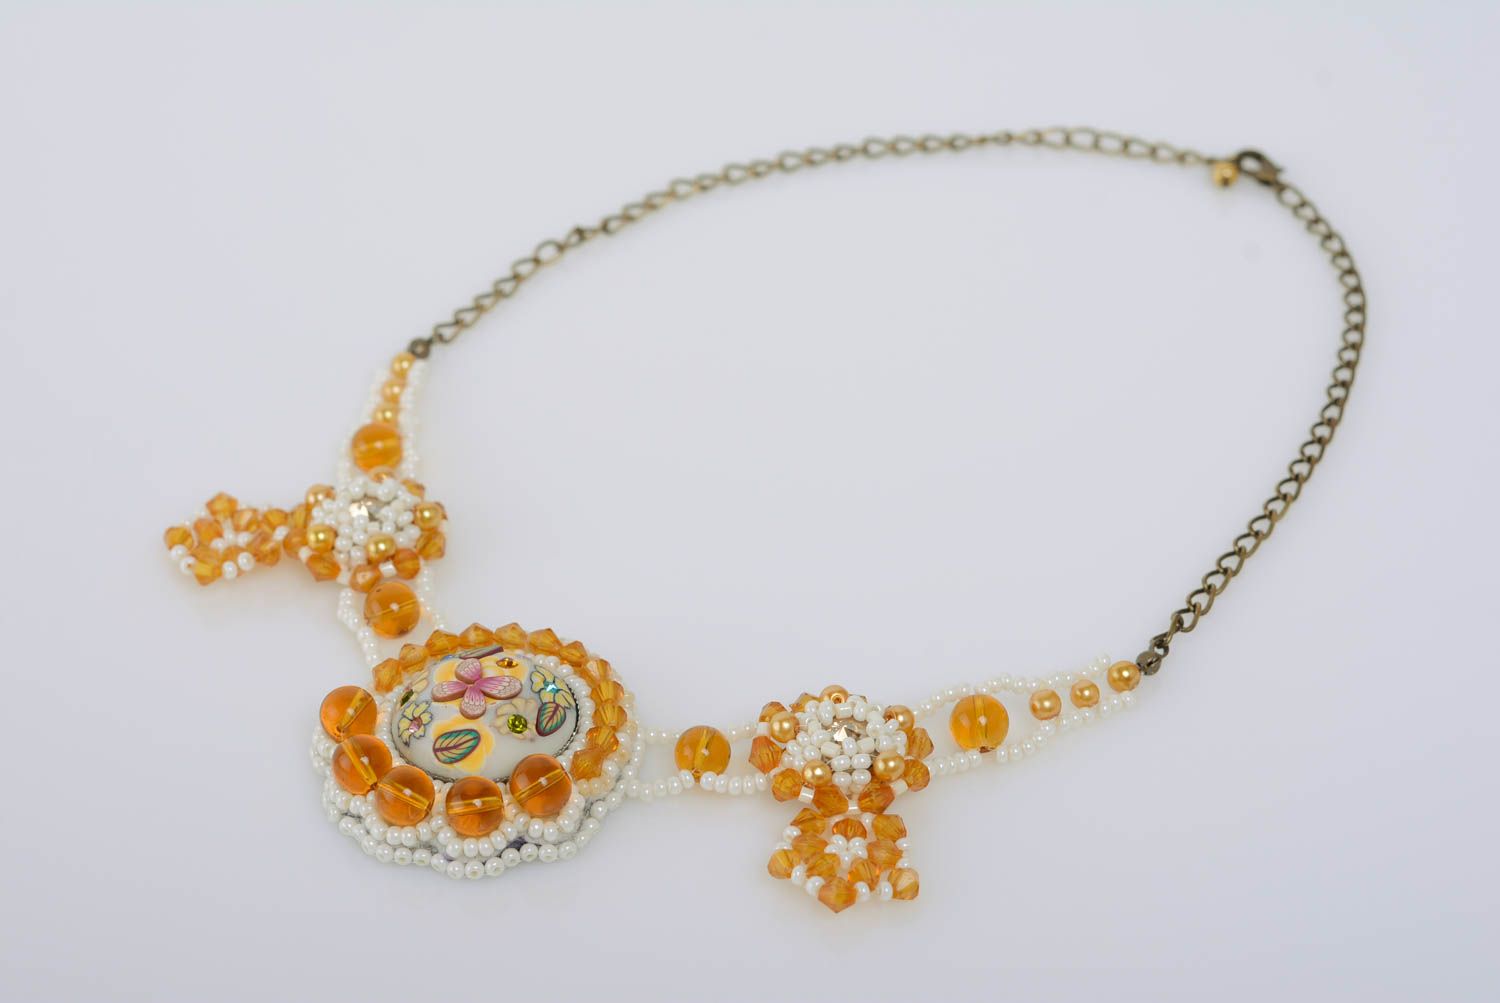 Handmade light bead embroidered white and yellow necklace on chain with crystals photo 1